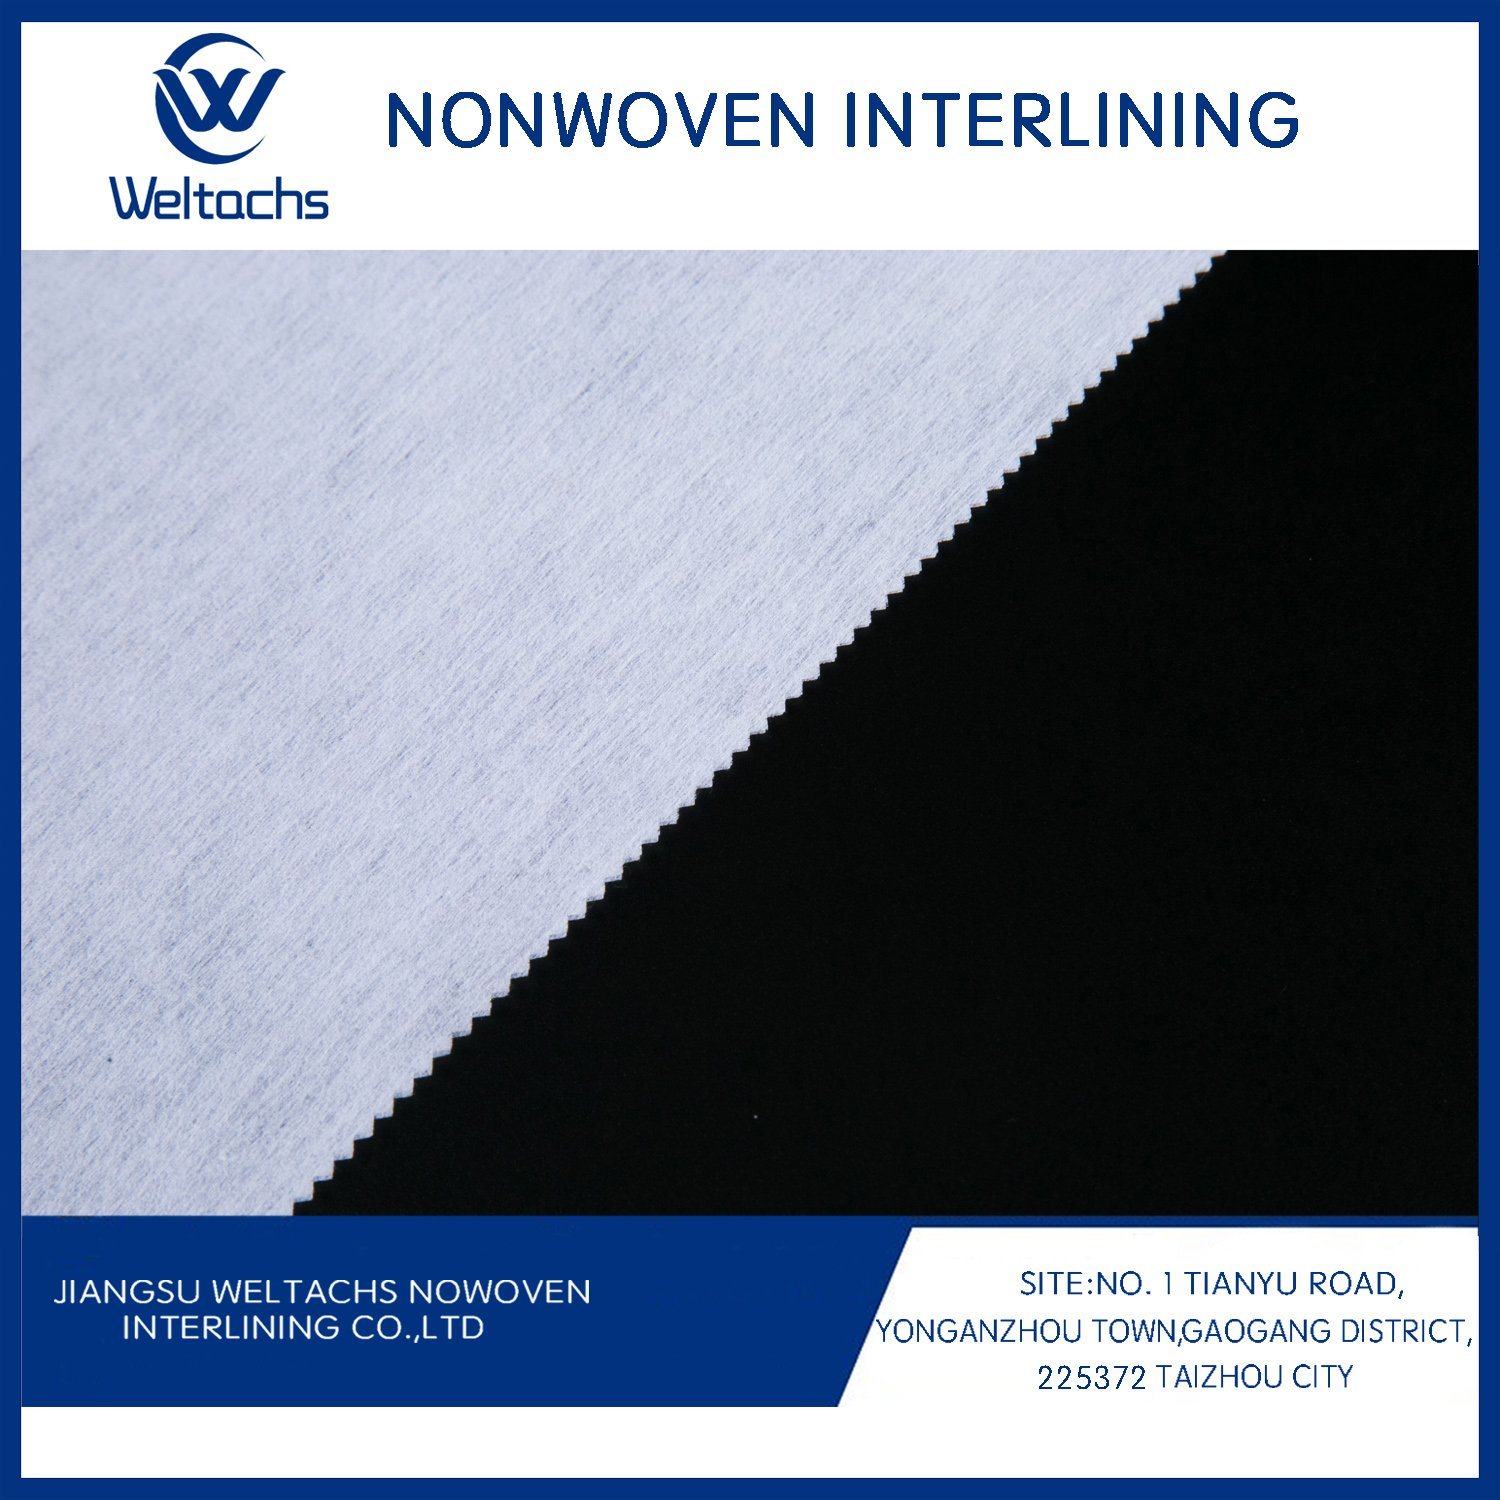 1050hf Non Woven Fusing Interlining Gum Stay Chemical Bond Garment Fusible Interlining Hf Quality